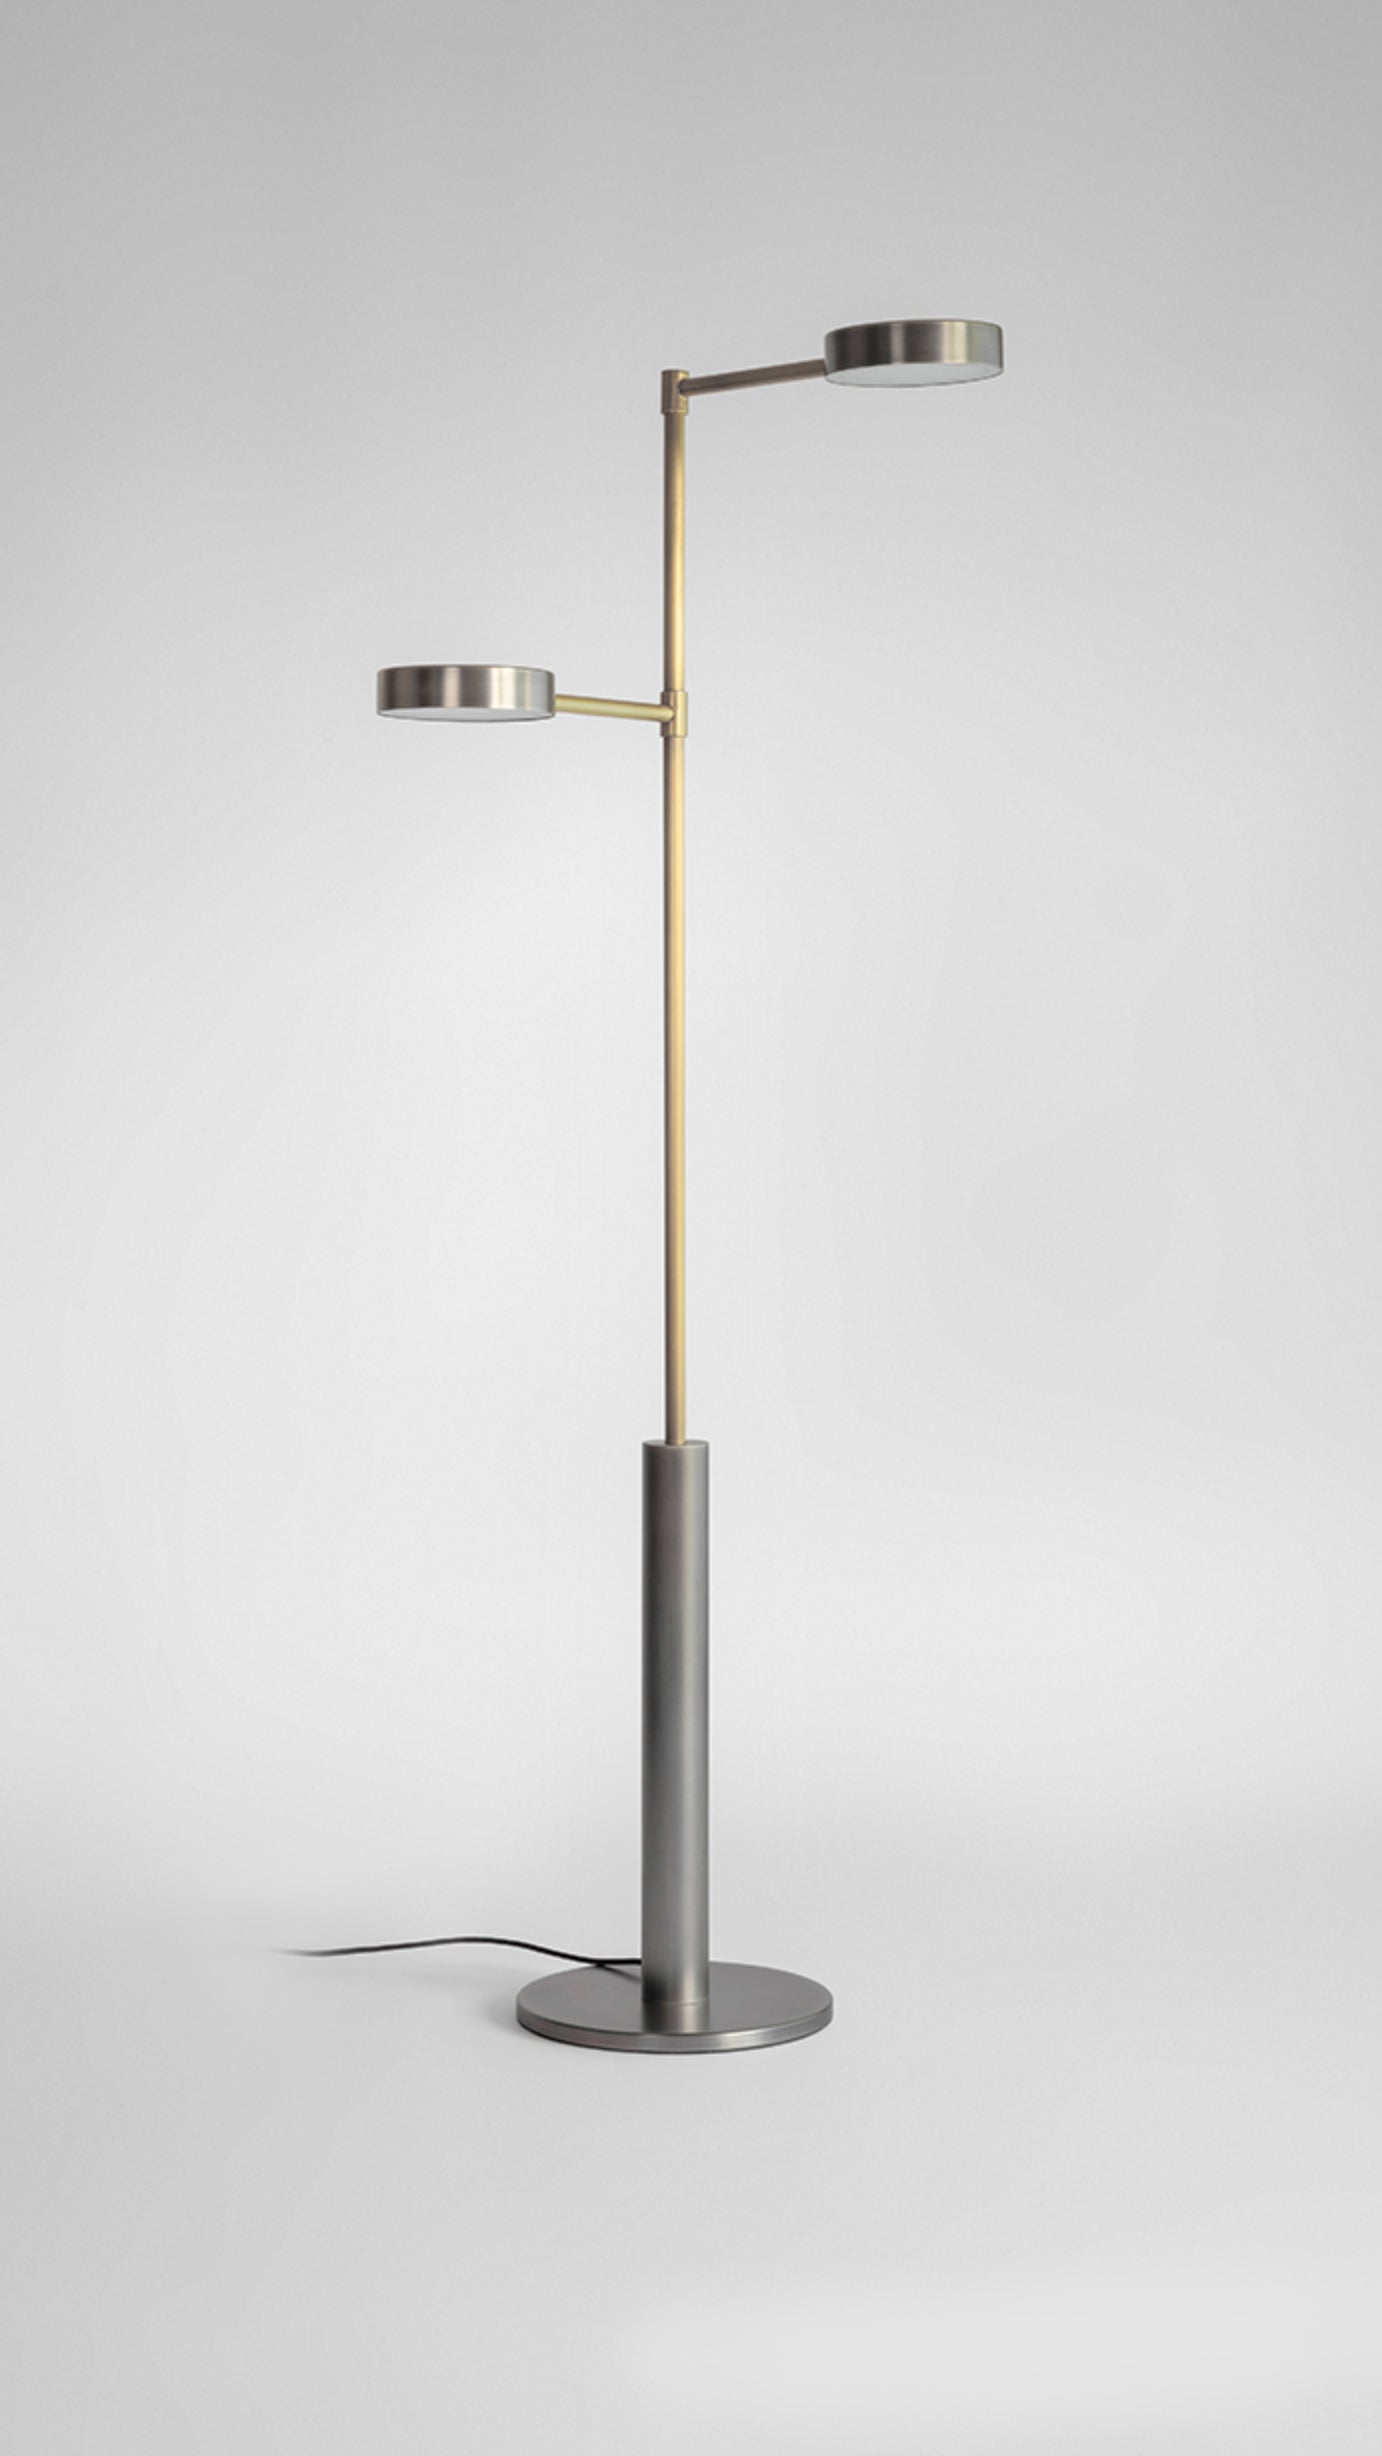 Brass Two Cylinders Floor Lamp by Square in Circle